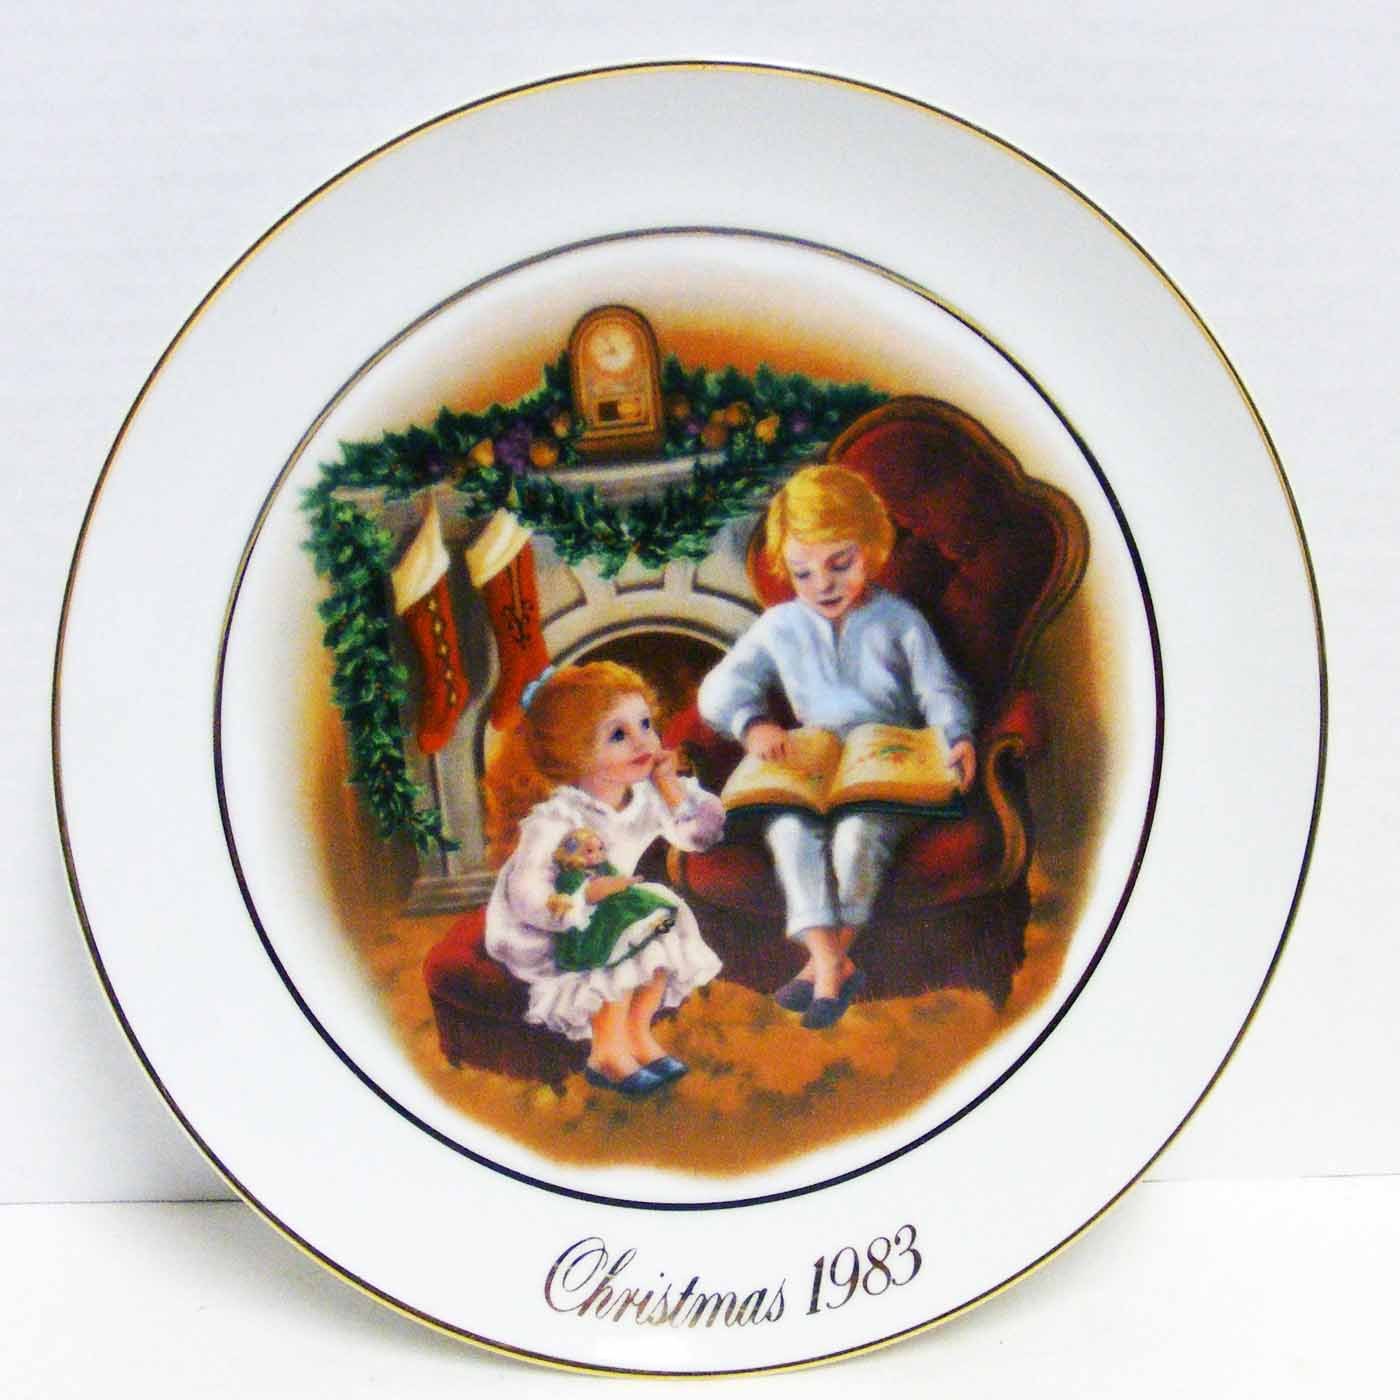 CHRISTMAS MEMORIES - 9" Vintage 1983 Holiday Plate by Avon - $14.99